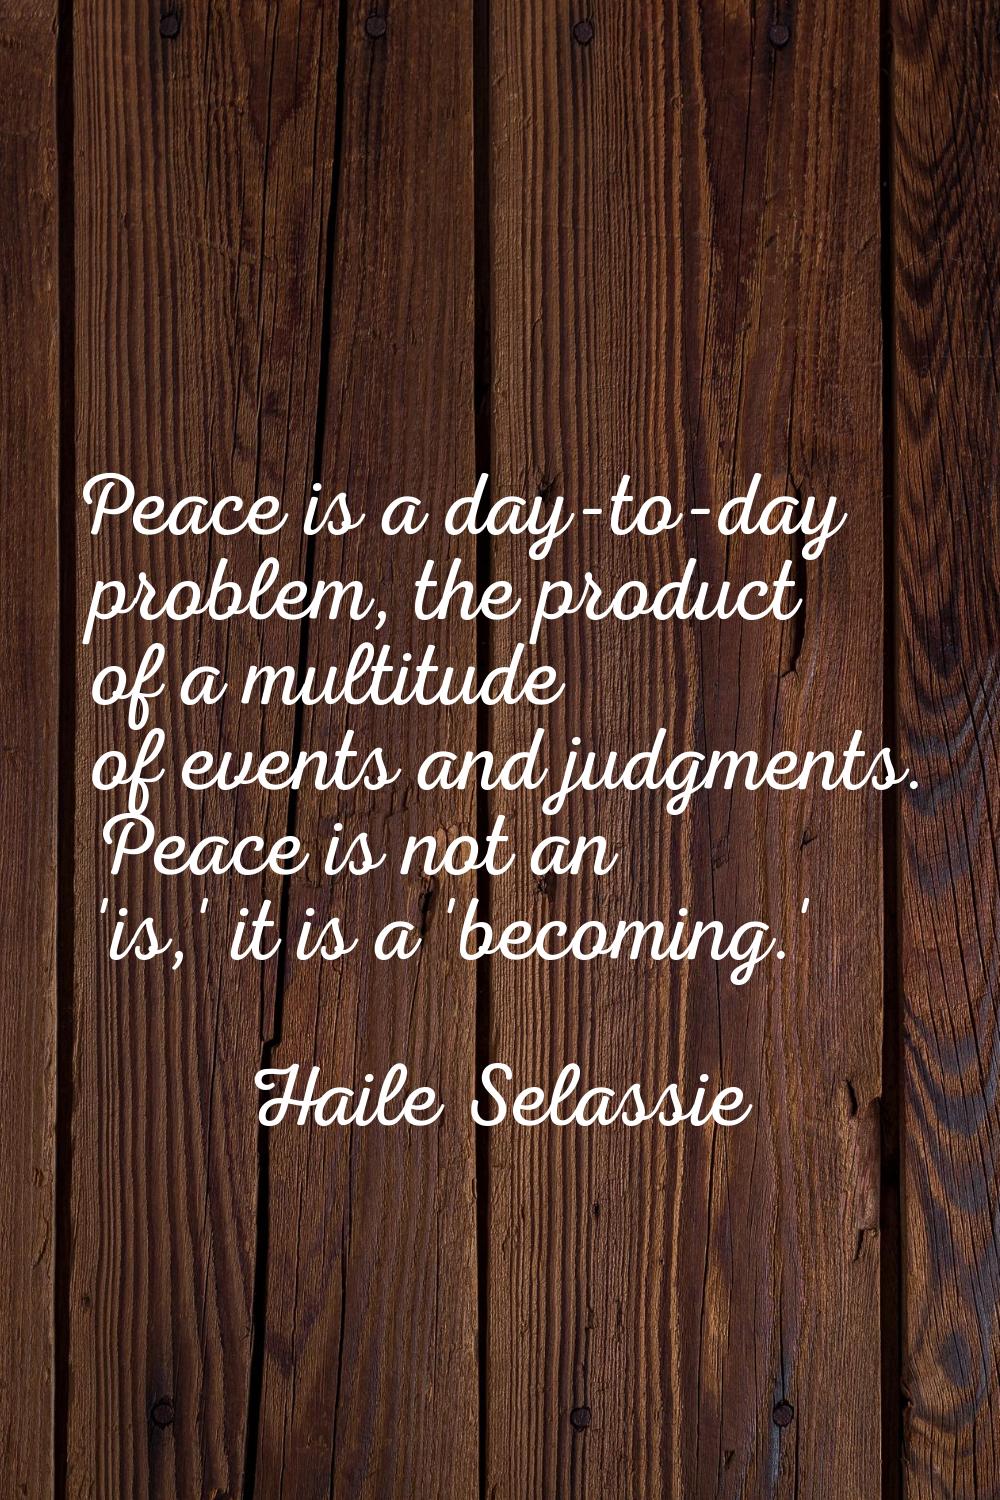 Peace is a day-to-day problem, the product of a multitude of events and judgments. Peace is not an 